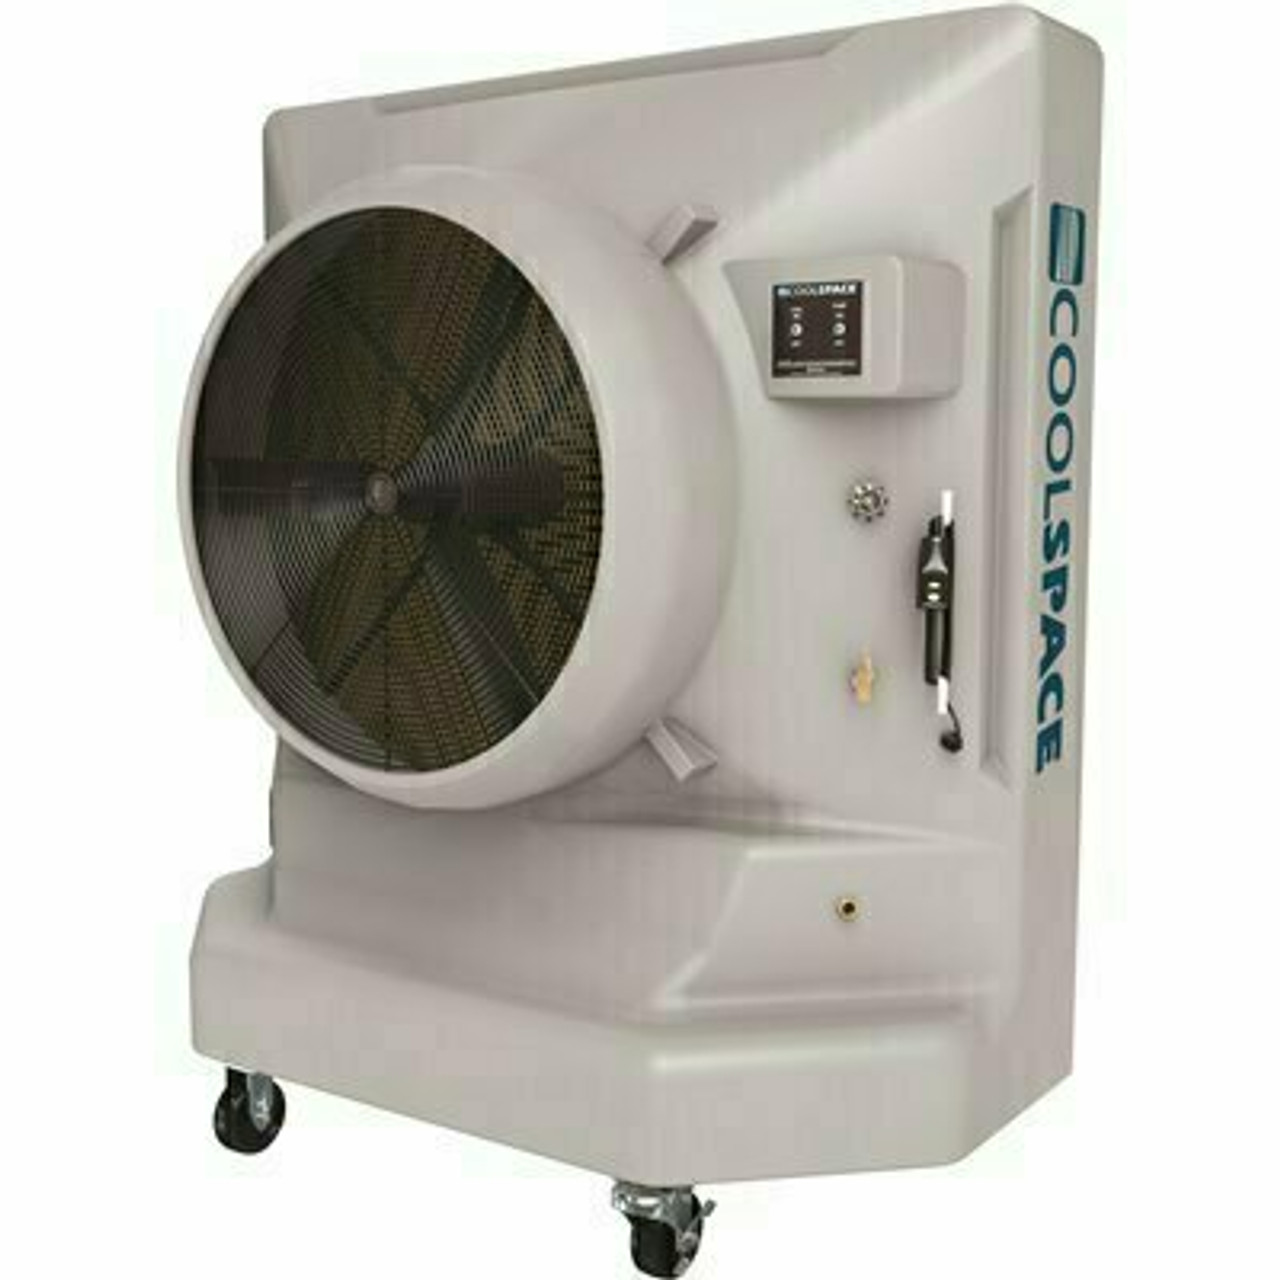 Cool-Space Avalanche-36-1D 9500 Cfm 1-Speed Portable Evaporative Cooler For 2900 Sq. Ft.